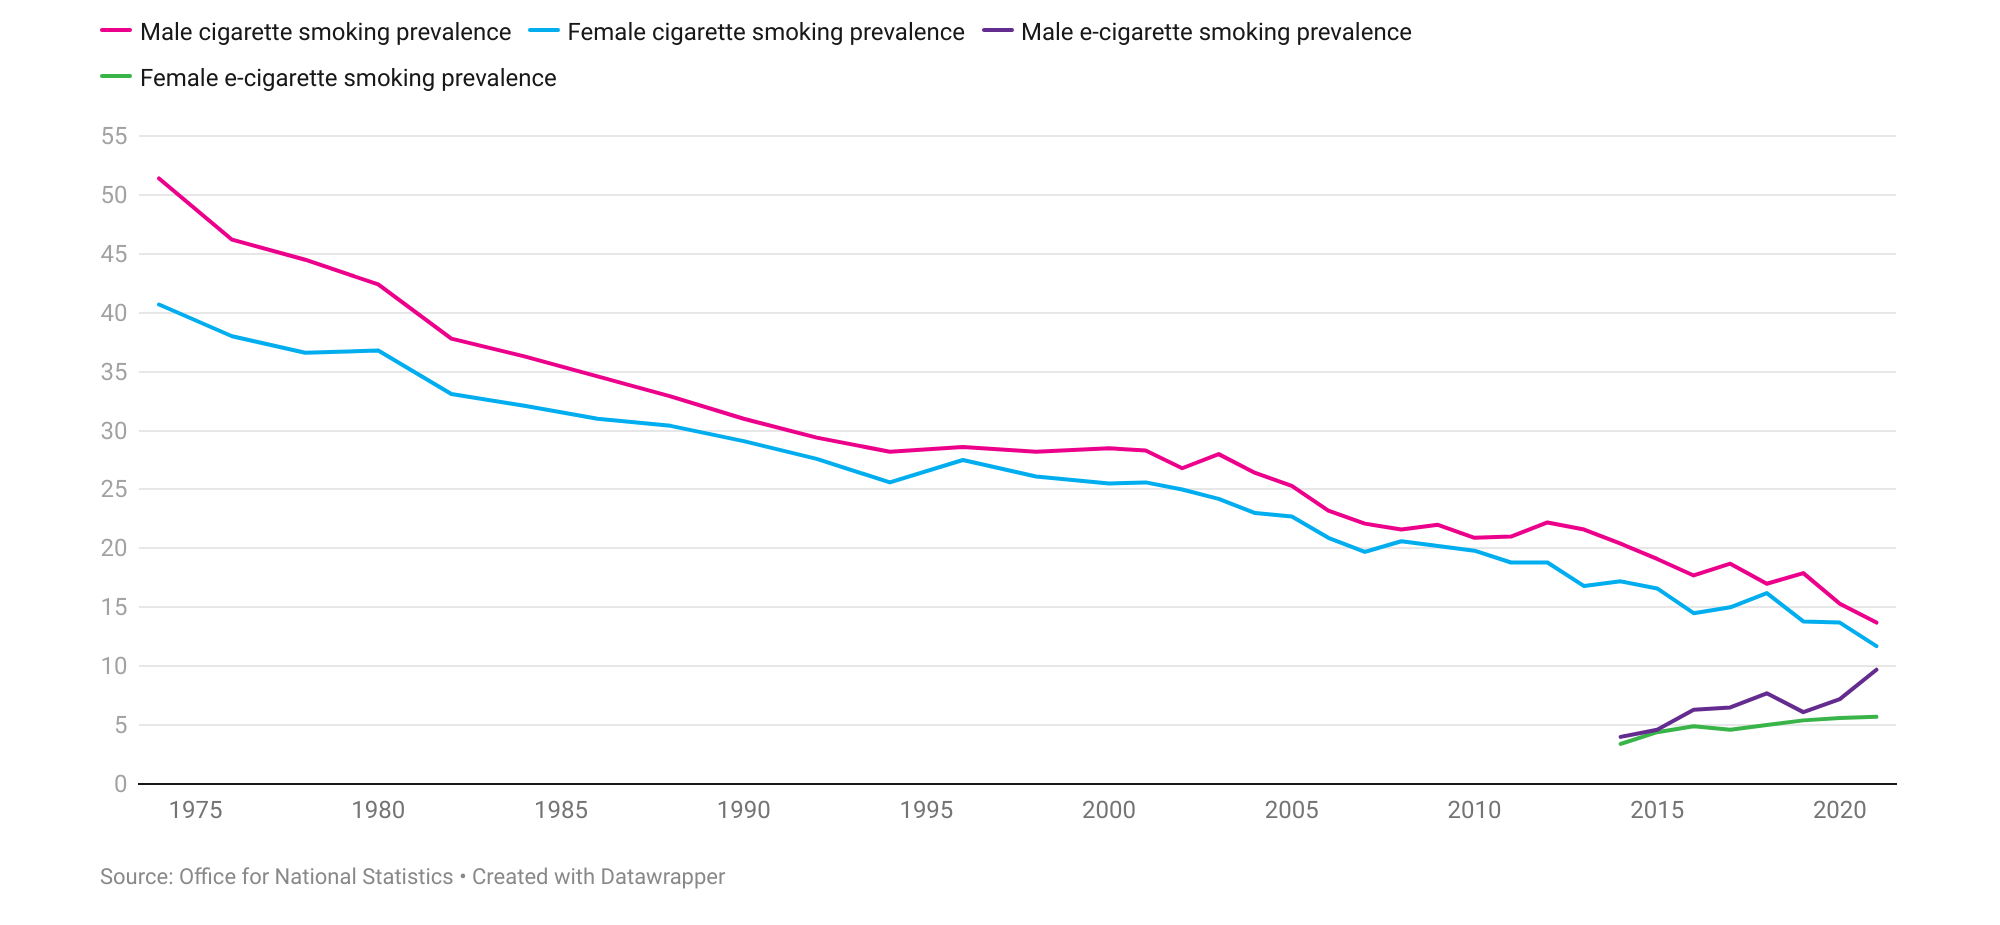 Chart showing proportion of men and women smoking cigarettes falling from 51.4% and 40.7% respectively in 1974, to less than 15% in 2021. Corresponding increase in E-cigarette use from less than 5% in 2014 to 9.7% for men and 5.7% for women in 2021.